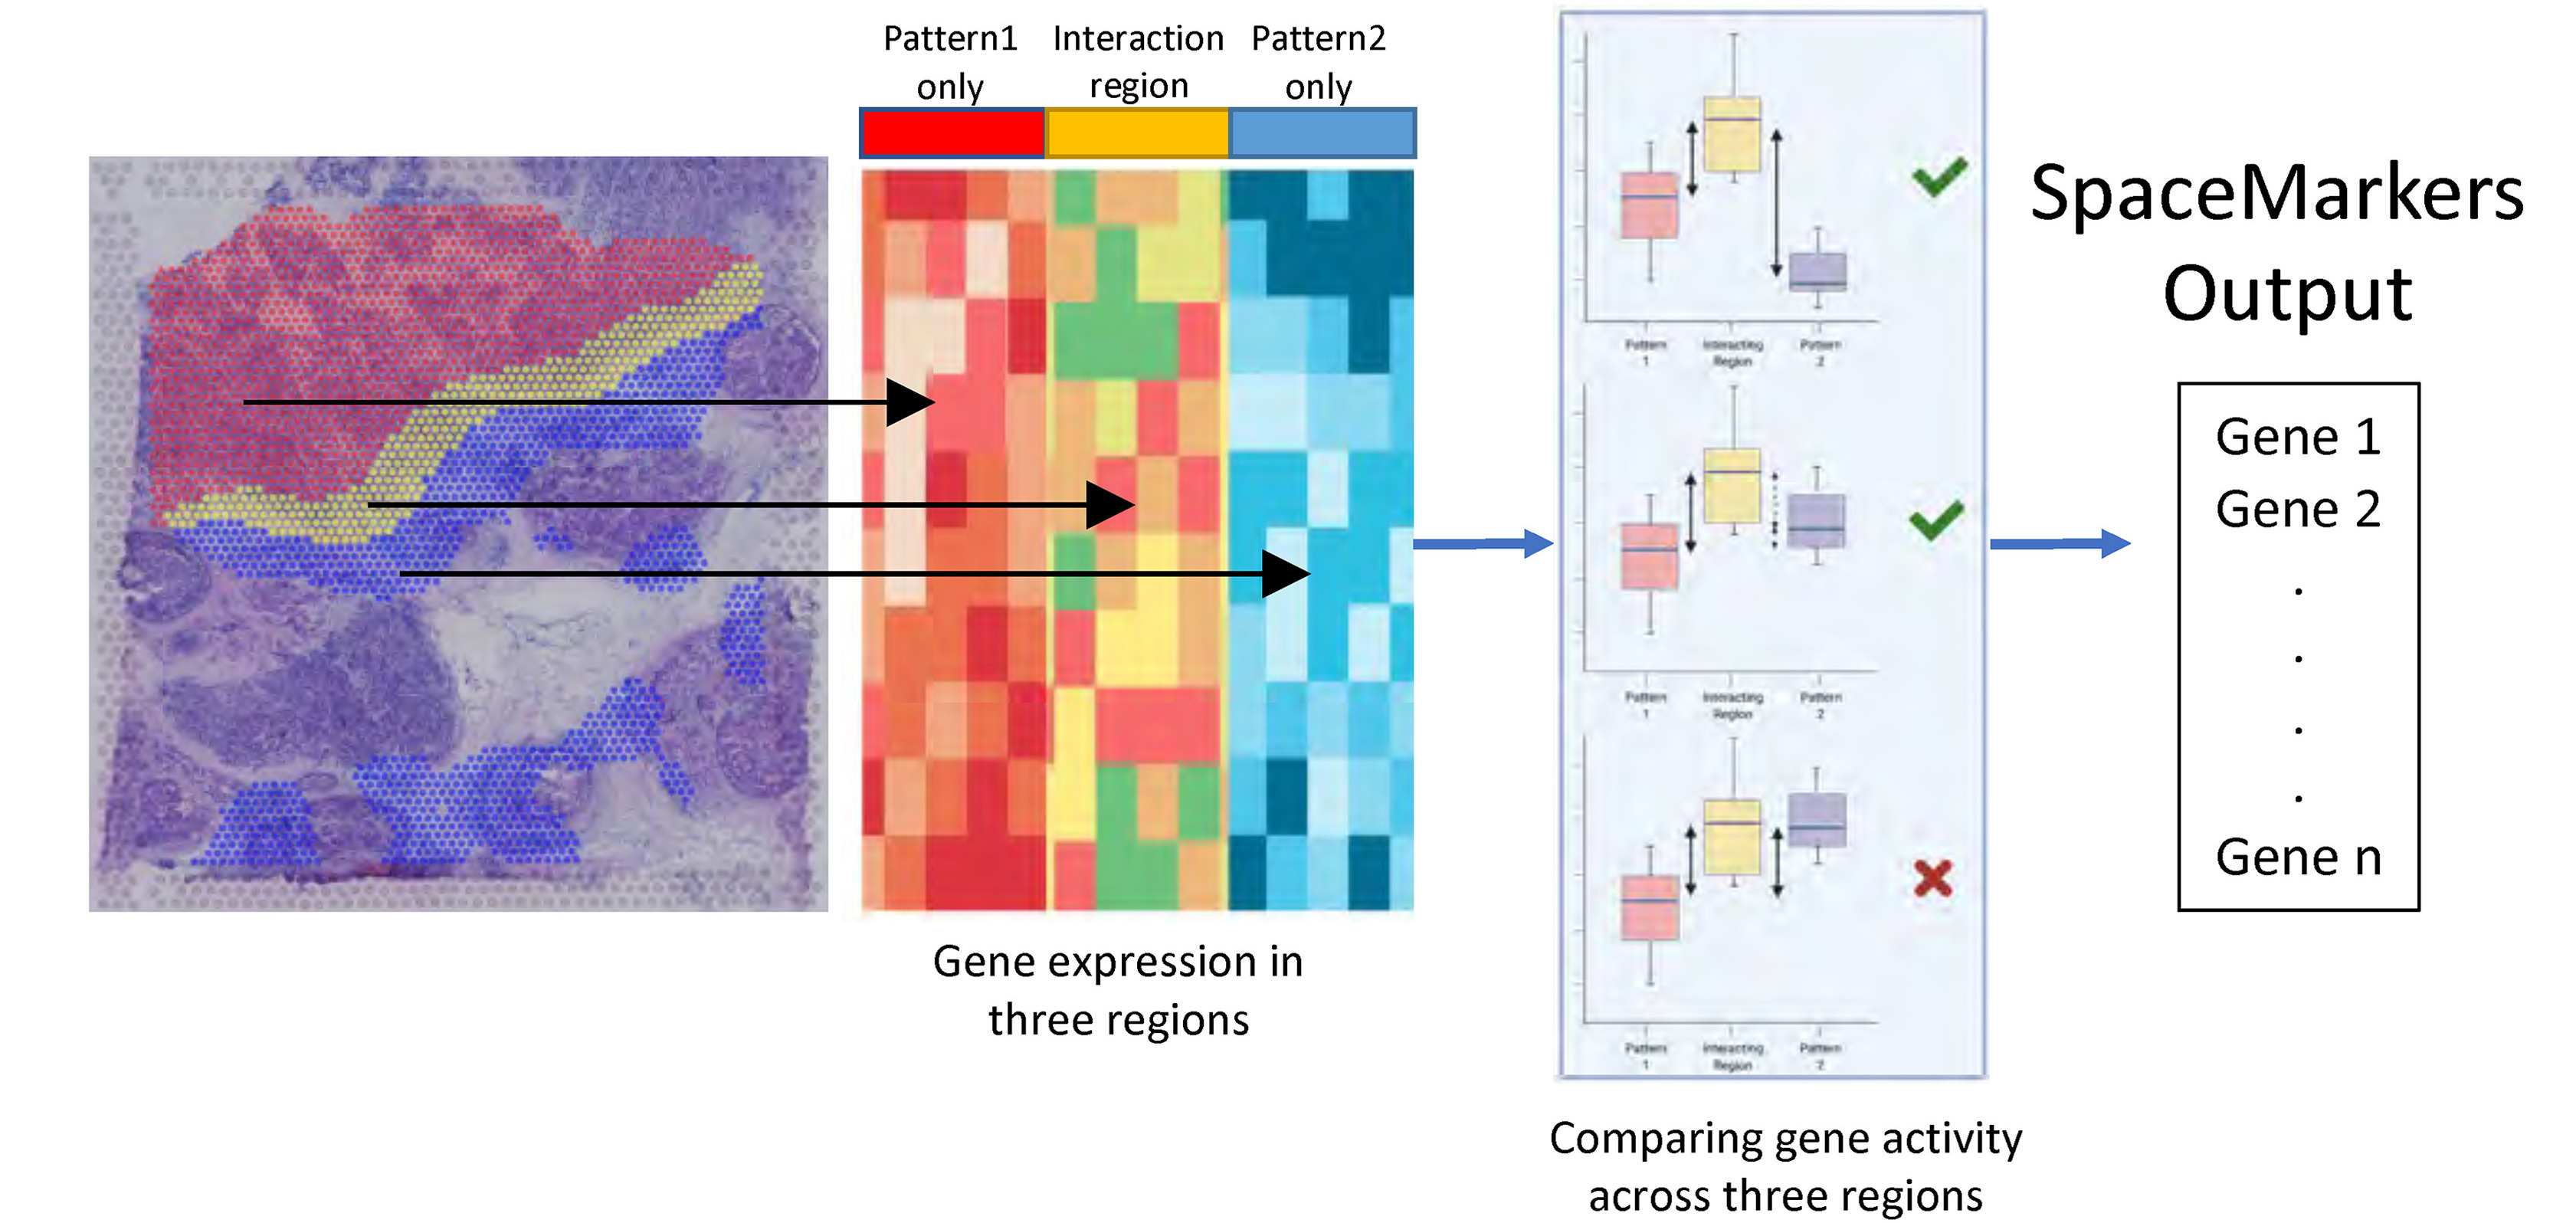 Figure 1. SpaceMarkers identifies genes associated with cell–cell interactions using spatially overlapping patterns. The output is a list of genes associated with the pattern interaction. CREDIT: Modified from Deshpande et al. (2) (Open Archive).